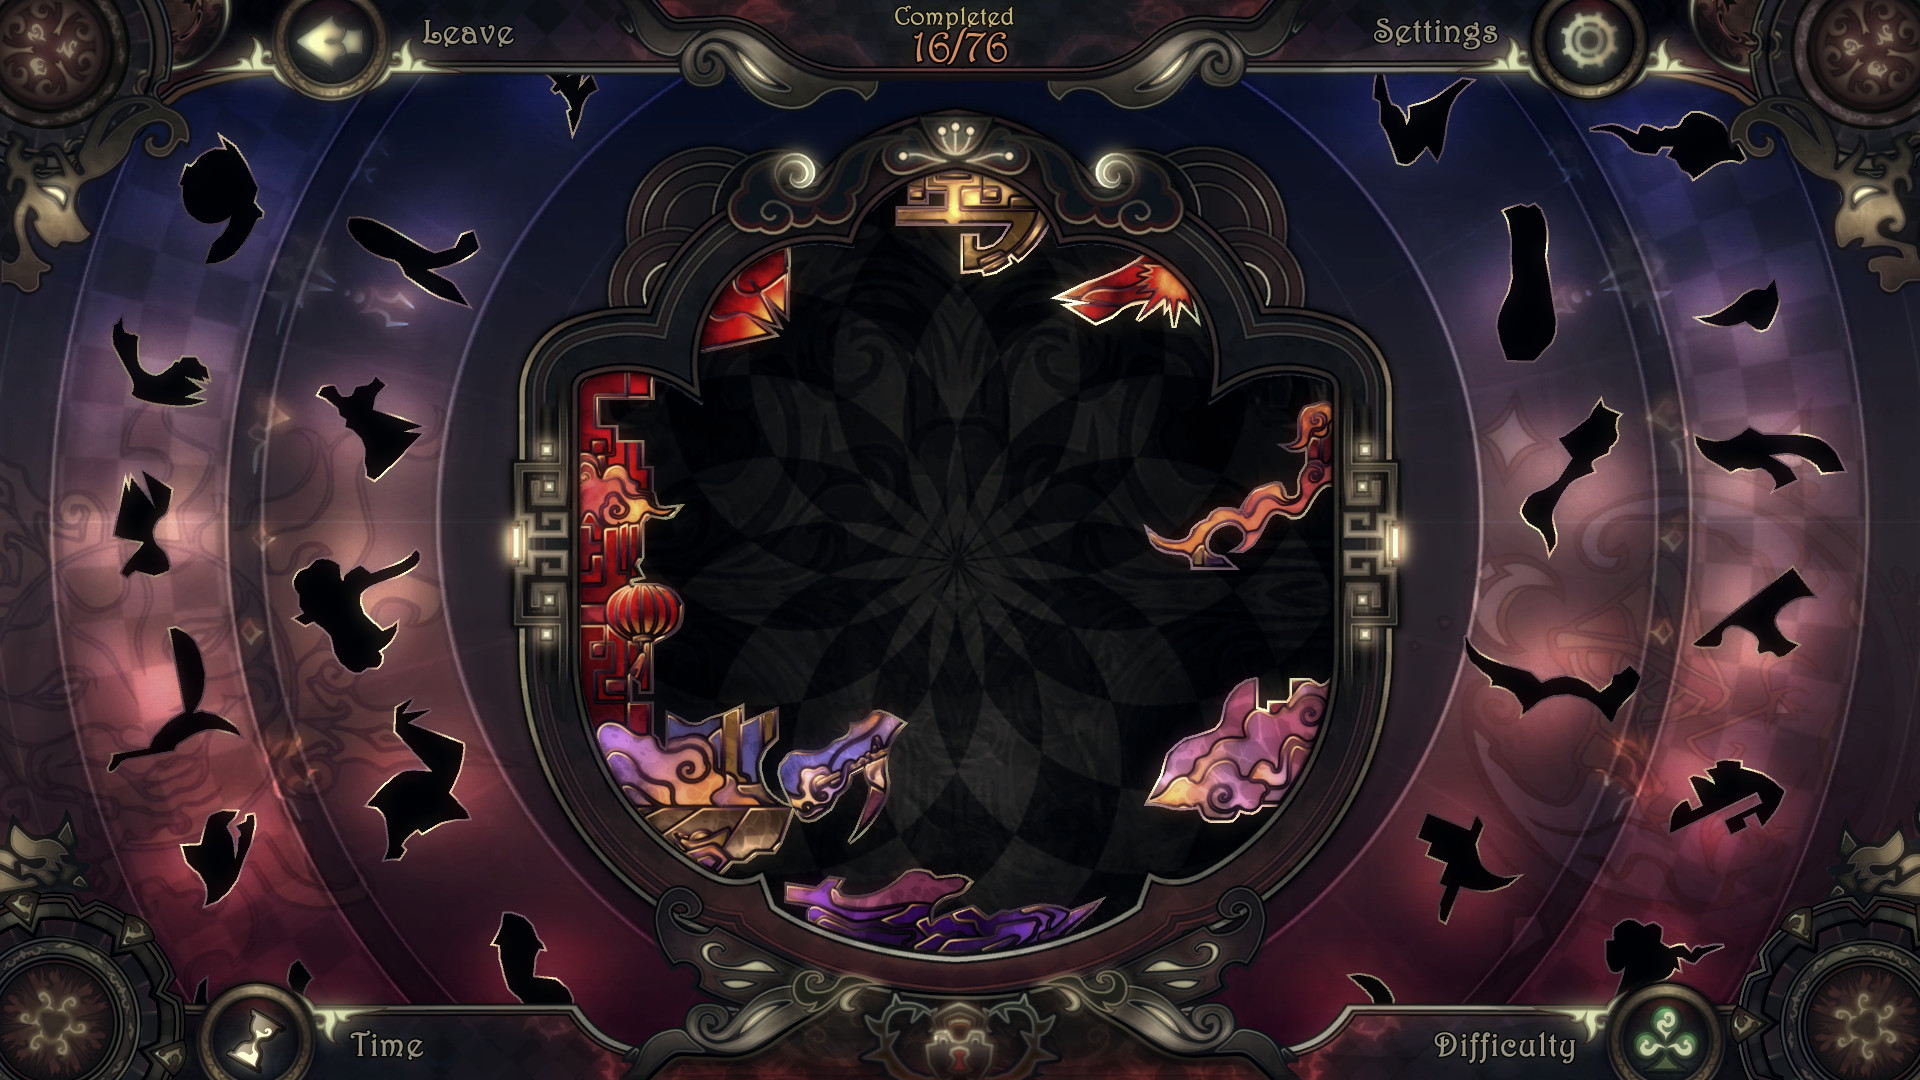 Glass Masquerade 2: Illusions - Lunar Year Puzzle Featured Screenshot #1